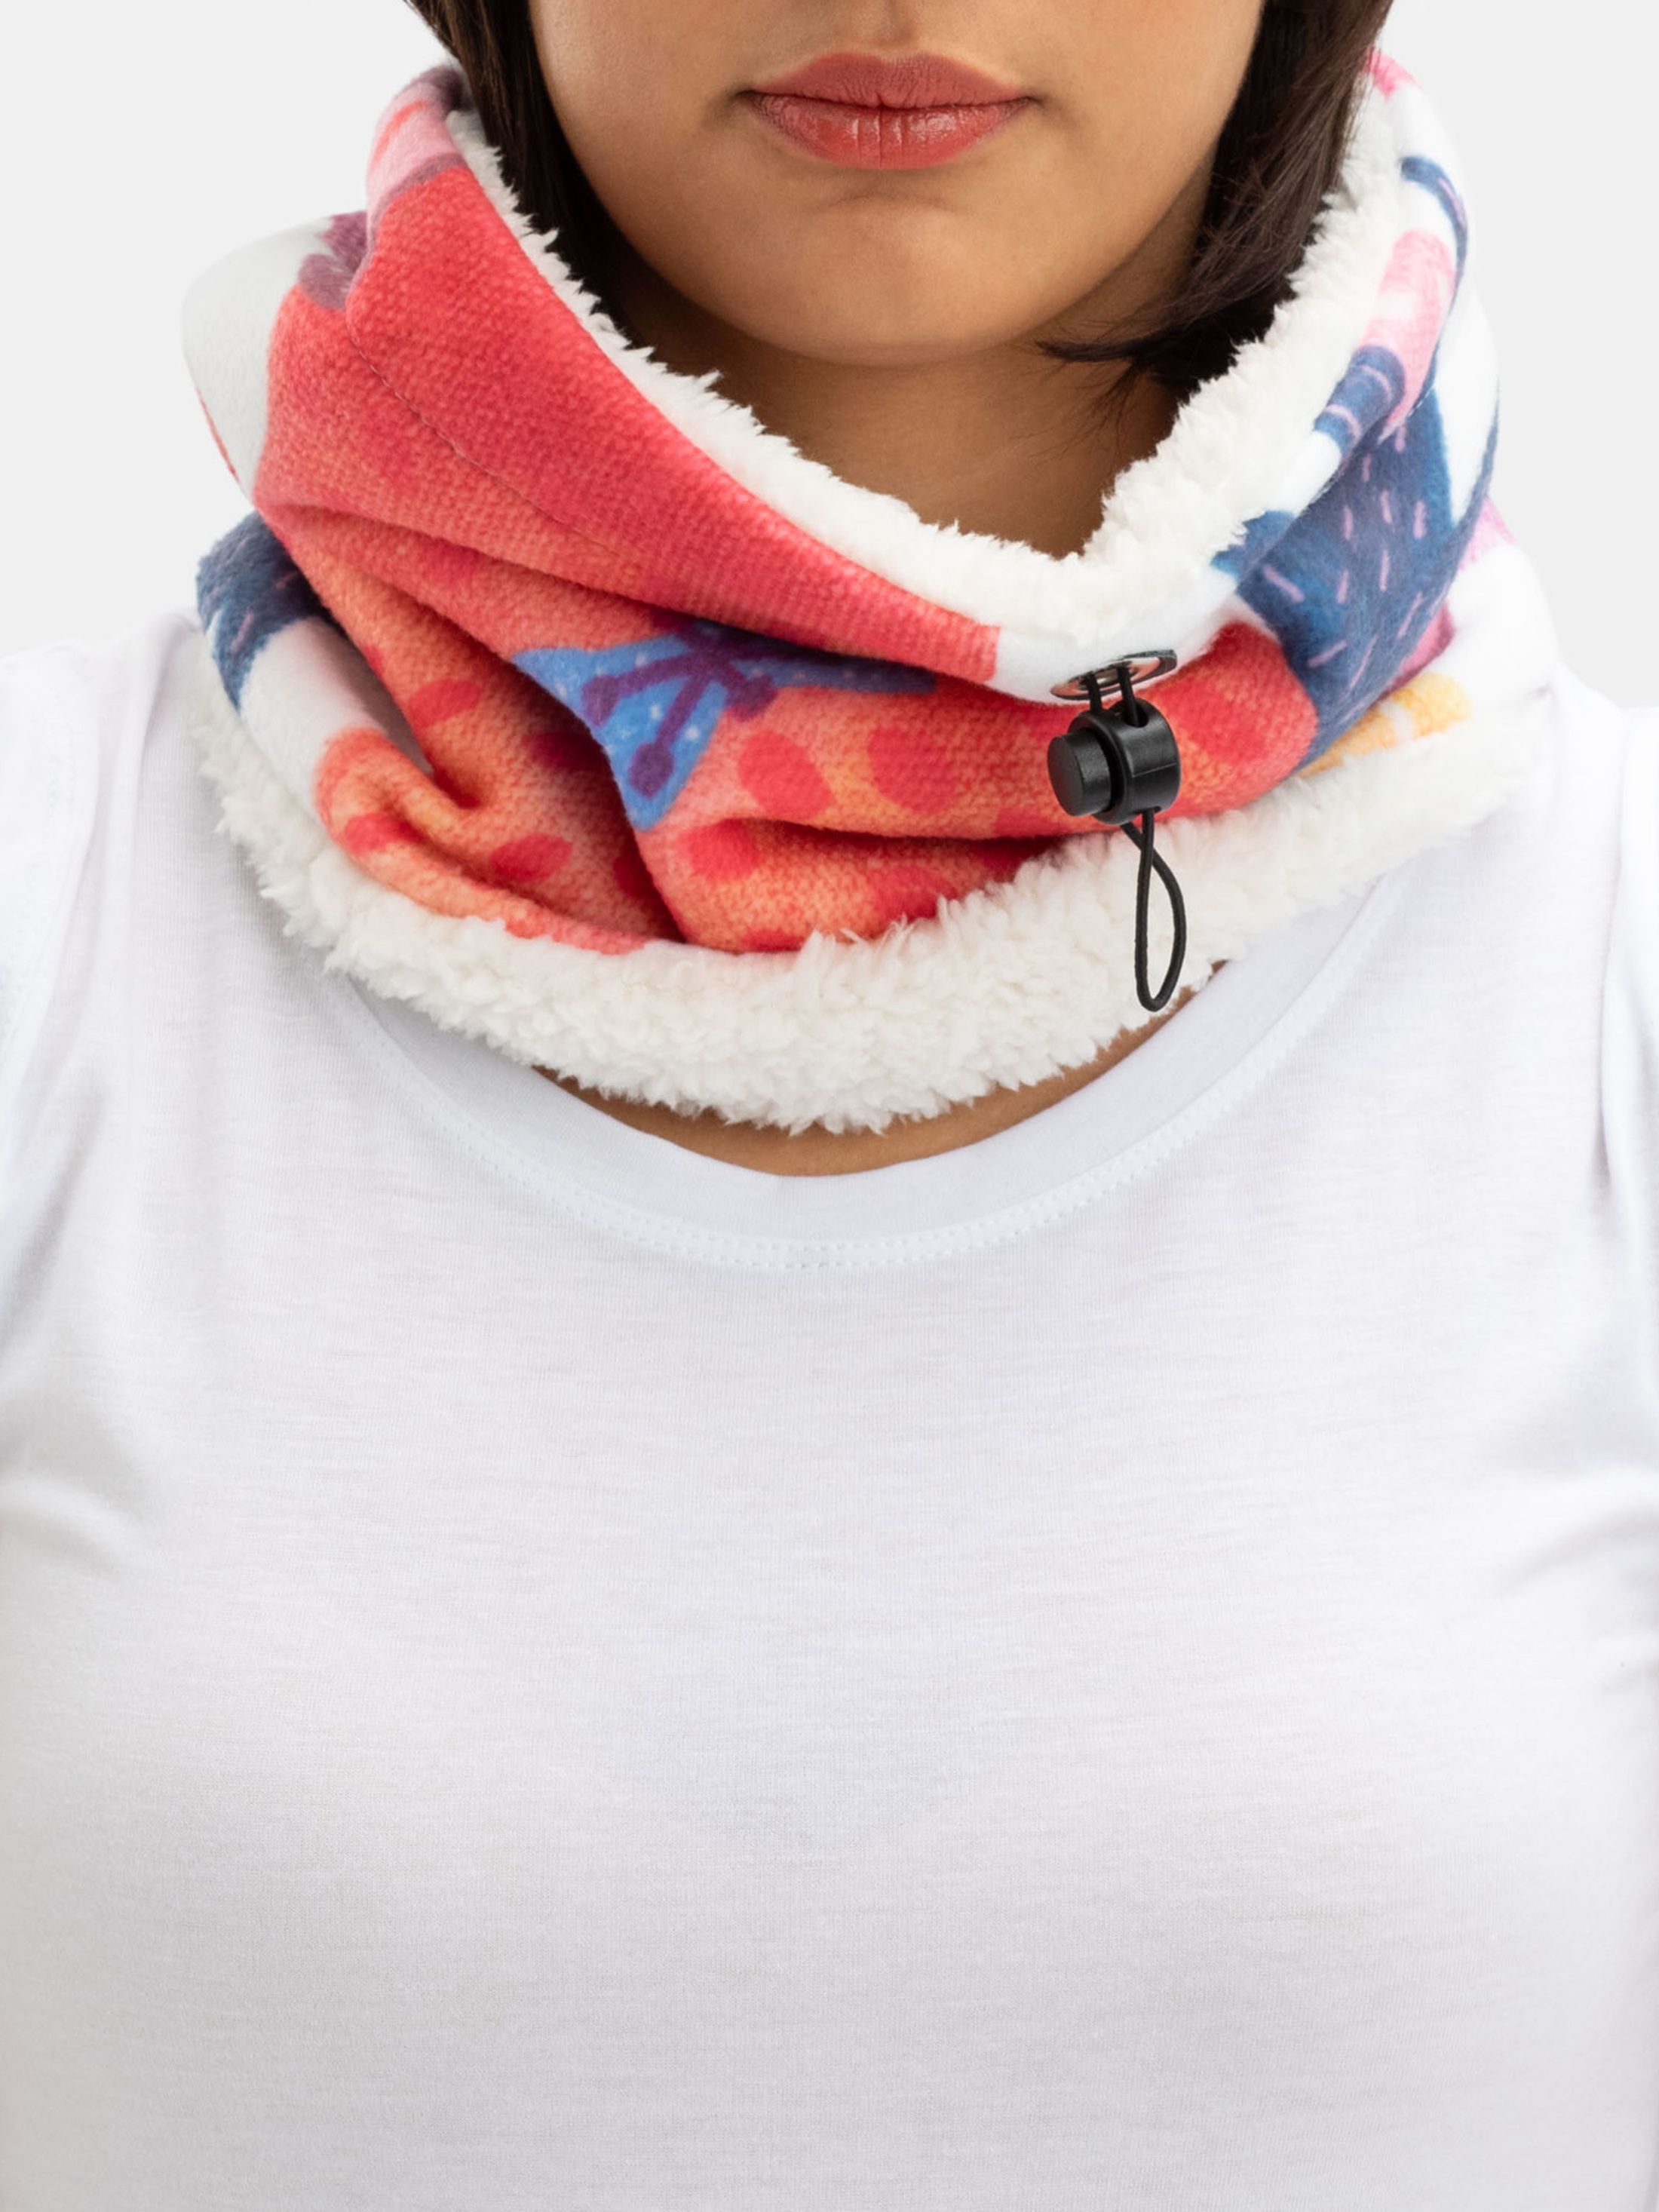 Neck Warmer in the Snow